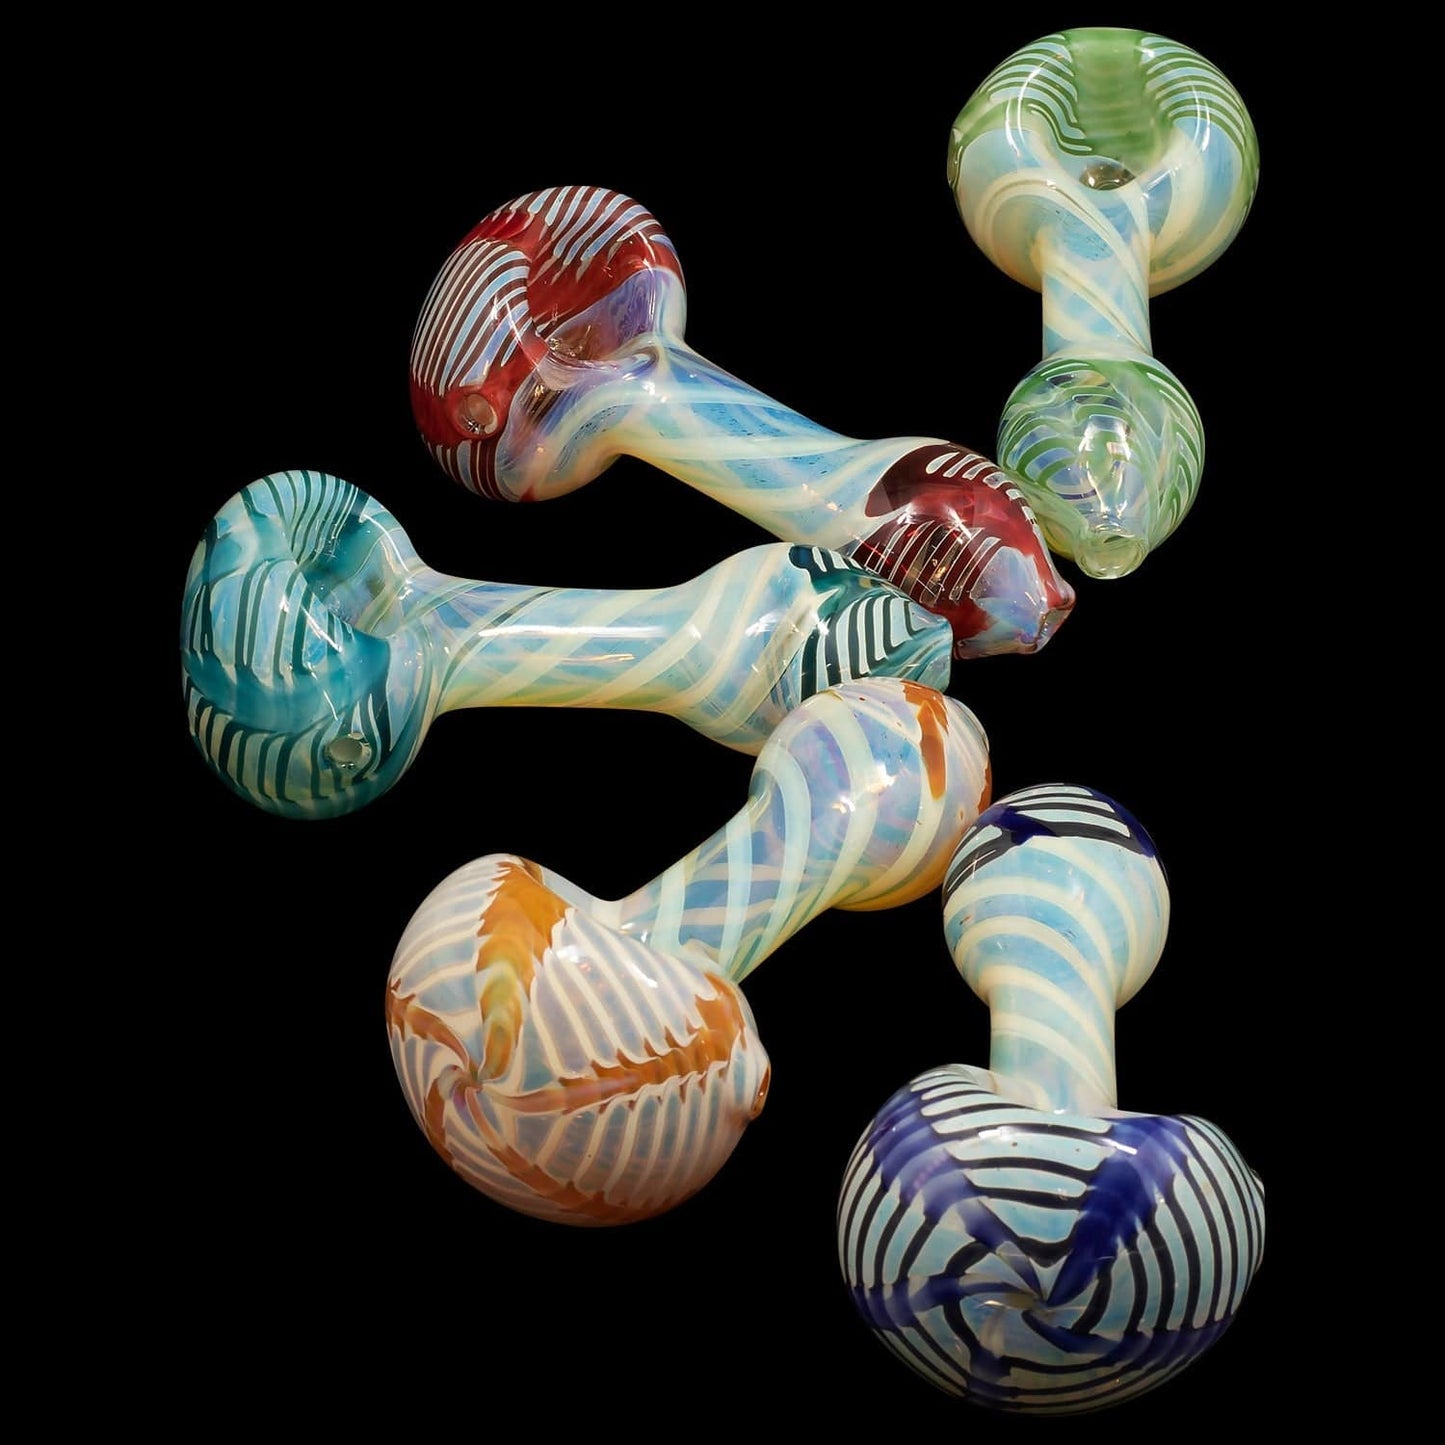 LA Pipes Hand Pipe "Twisty Cane" Spoon Glass Pipe (Various Colors)